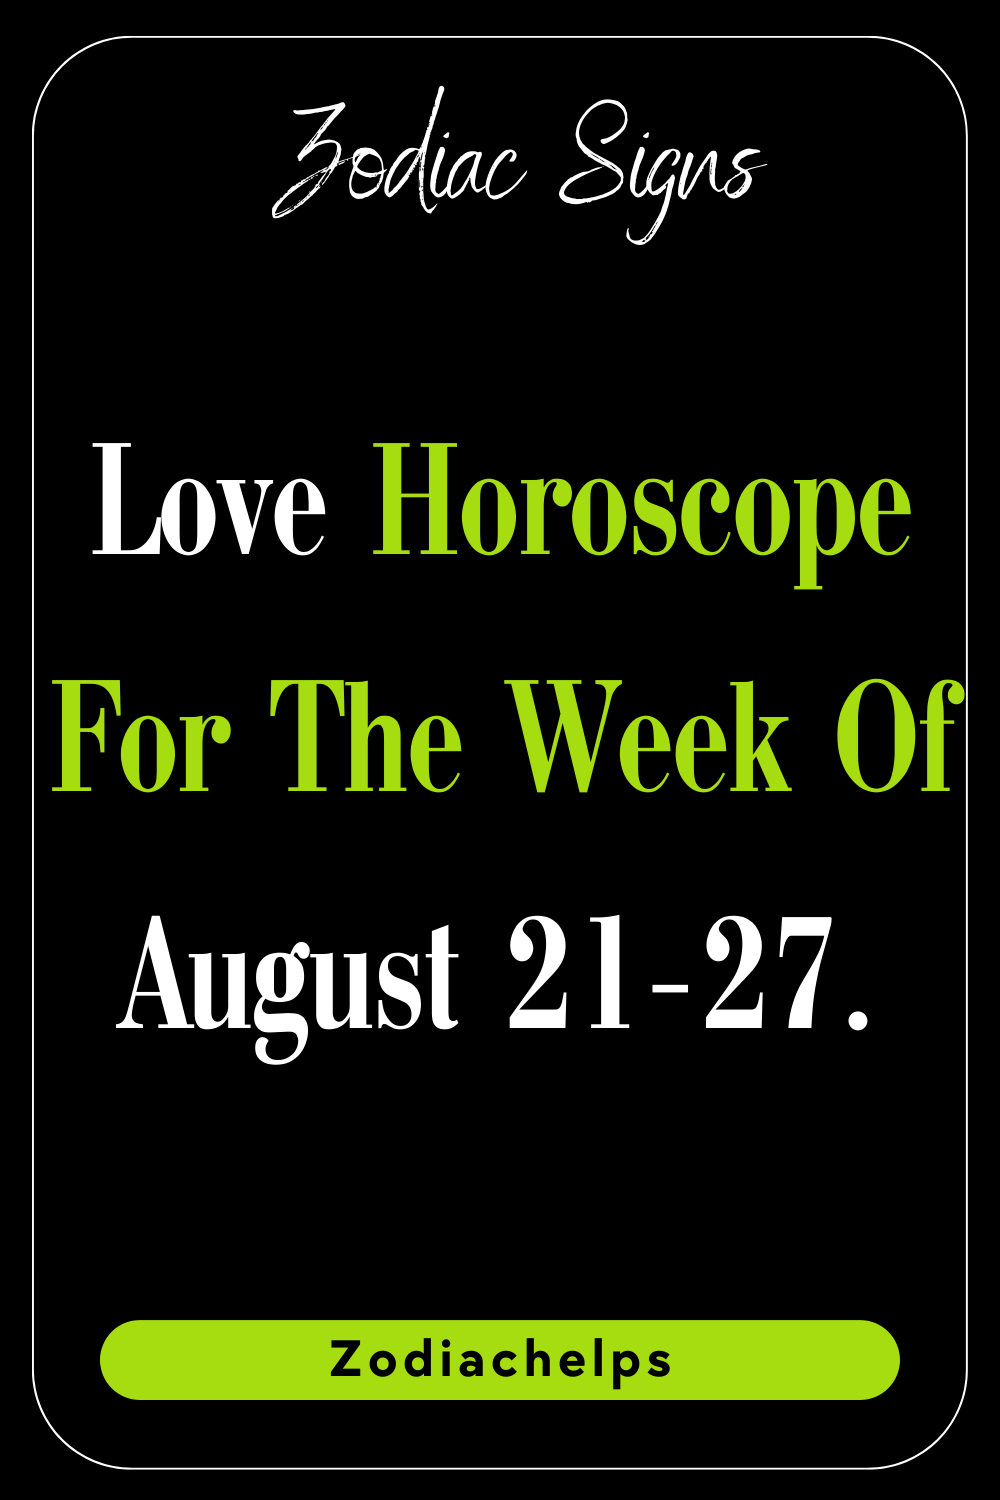 Love Horoscope For The Week Of August 21-27.